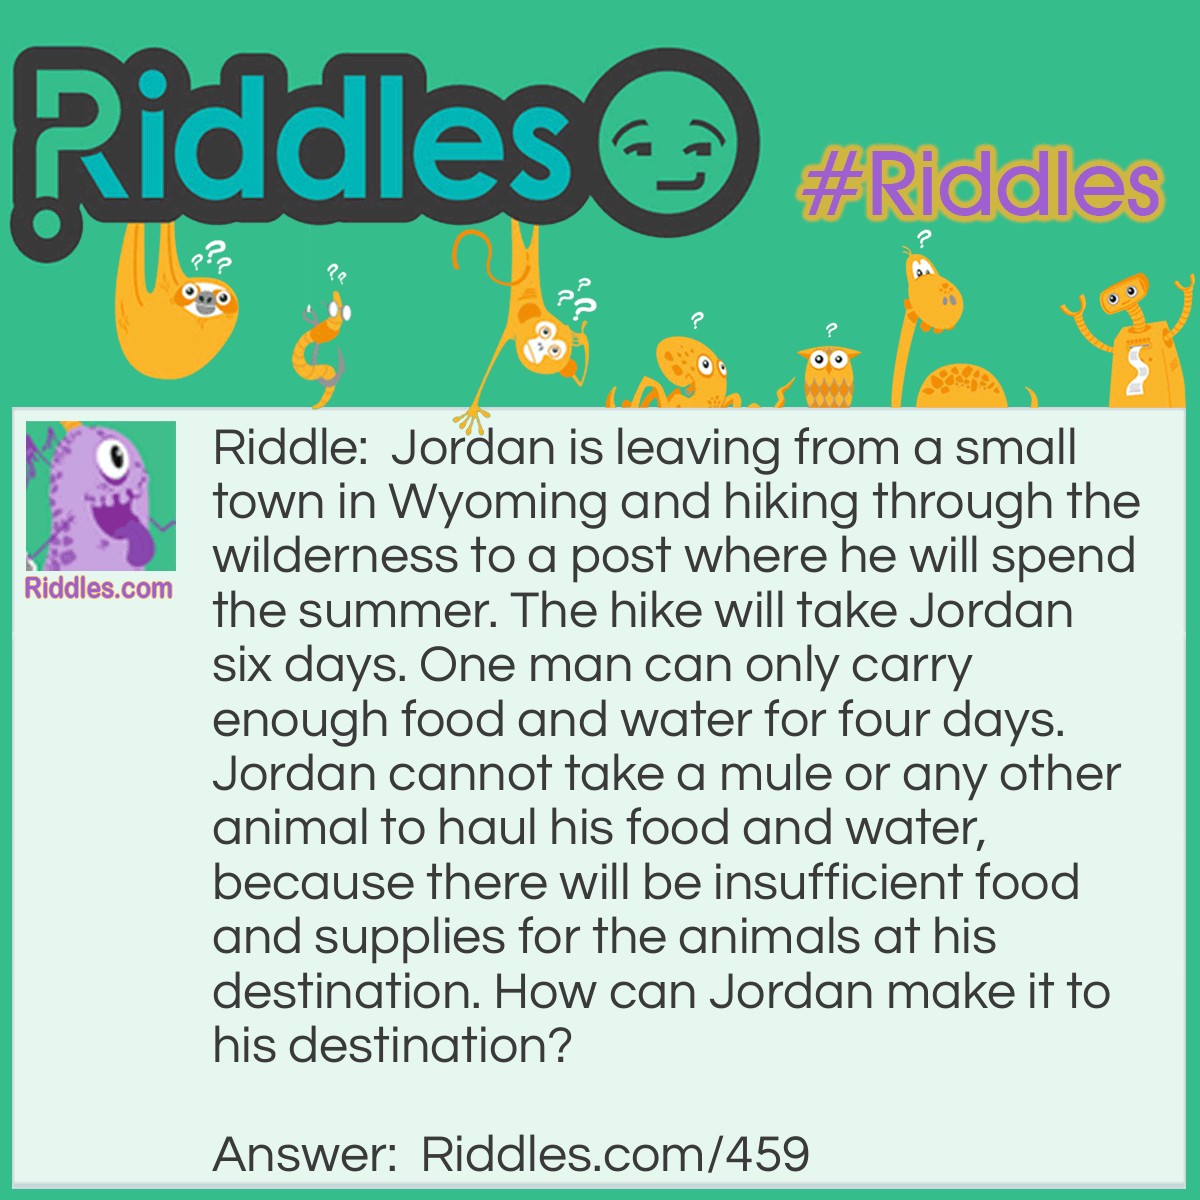 Riddle: Jordan is leaving from a small town in Wyoming and hiking through the wilderness to a post where he will spend the summer. The hike will take Jordan six days. One man can only carry enough food and water for four days. Jordan cannot take a mule or any other animal to haul his food and water, because there will be insufficient food and supplies for the animals at his destination. How can Jordan make it to his destination? Answer: Jordan takes two other hikers with him. Each hiker starts out with a four day supply of food and water. After the first day, the first hiker gives a one day supply to each Jordan and the second hiker. This leaves the first hiker with a one day supply to go home and Jordan and the second hiker now each have a four day supply again. After the second day, the second hiker gives Jordan a one day supply and keep a two day supply for himself so that he can get home. This gives Jordan a four day supply of food and water, and now he has enough to reach his destination.